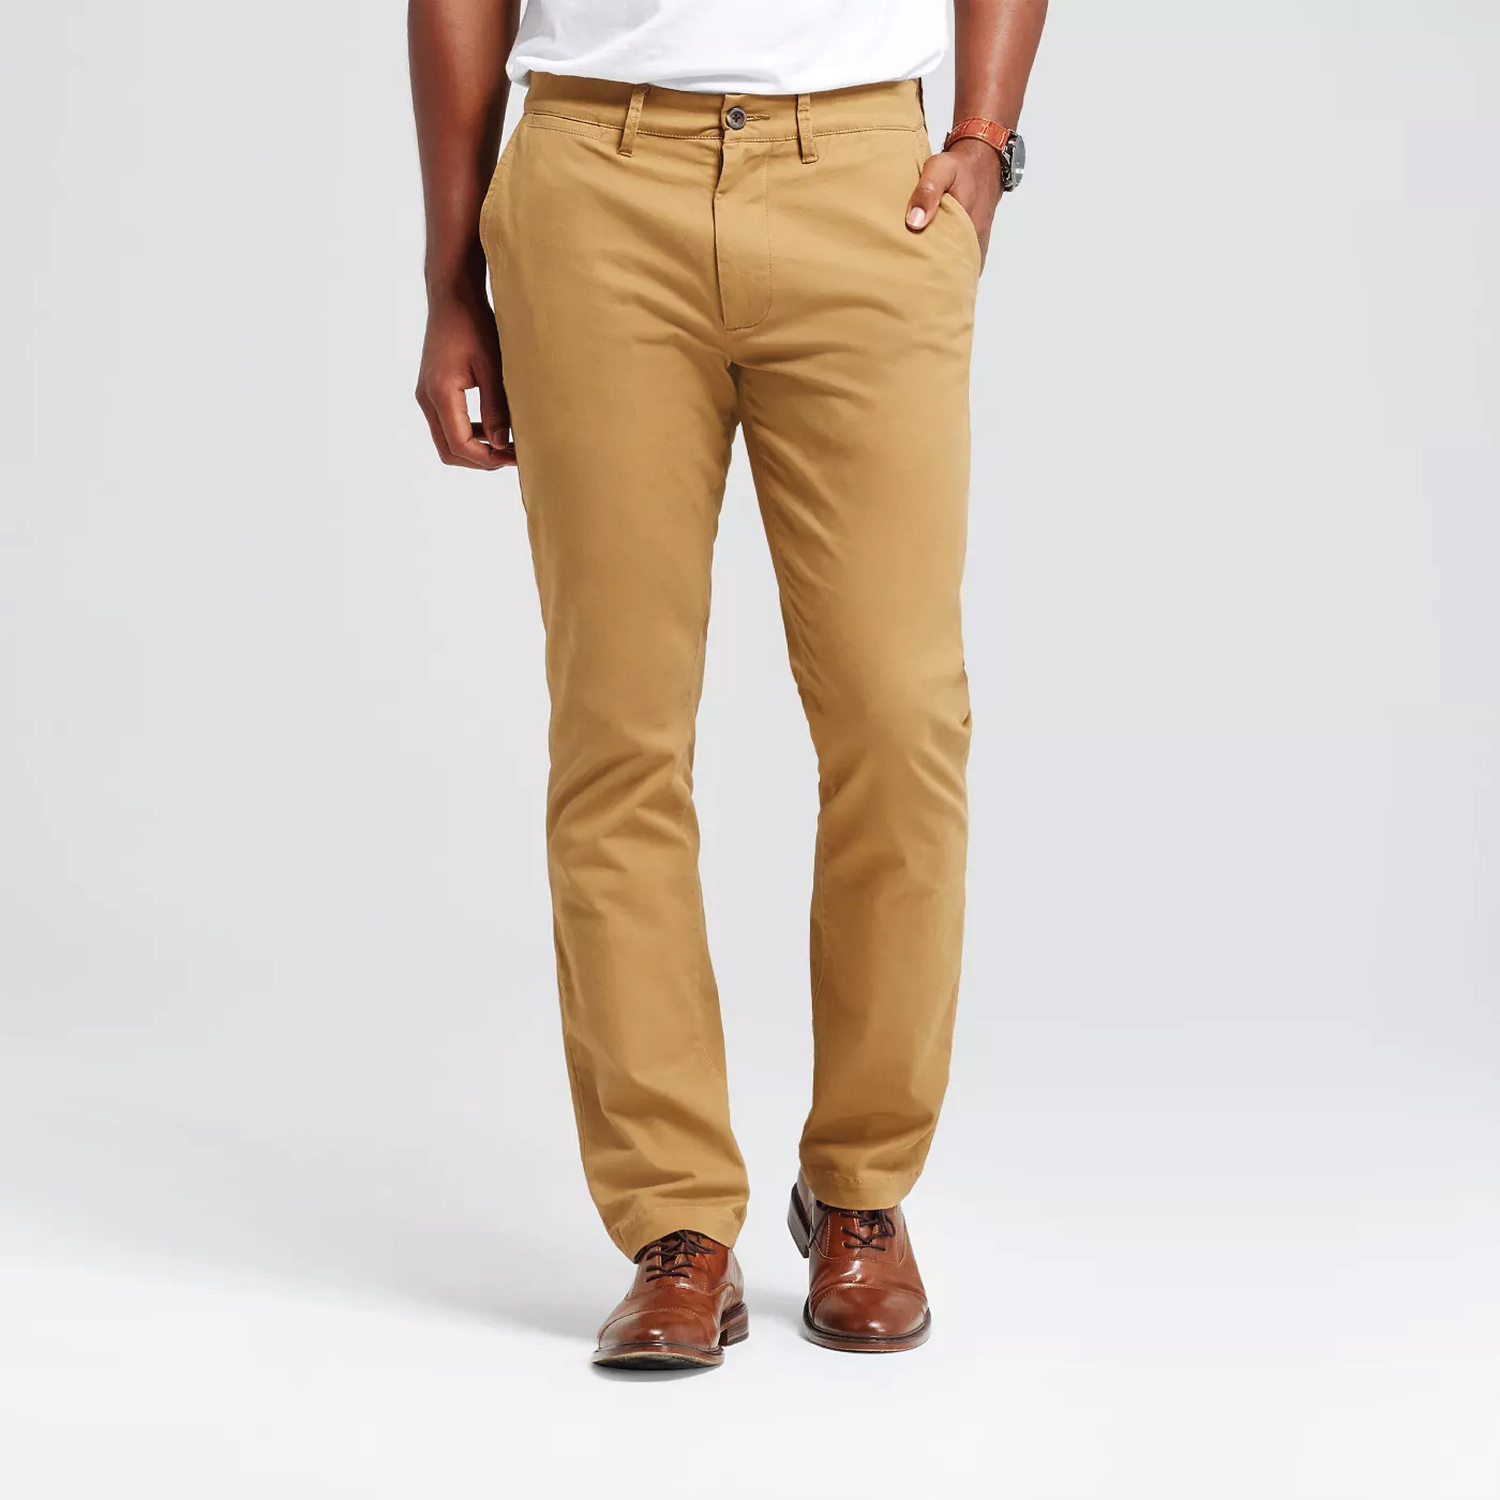 Where can I find mens pants with a waist size below 28 inches  Quora